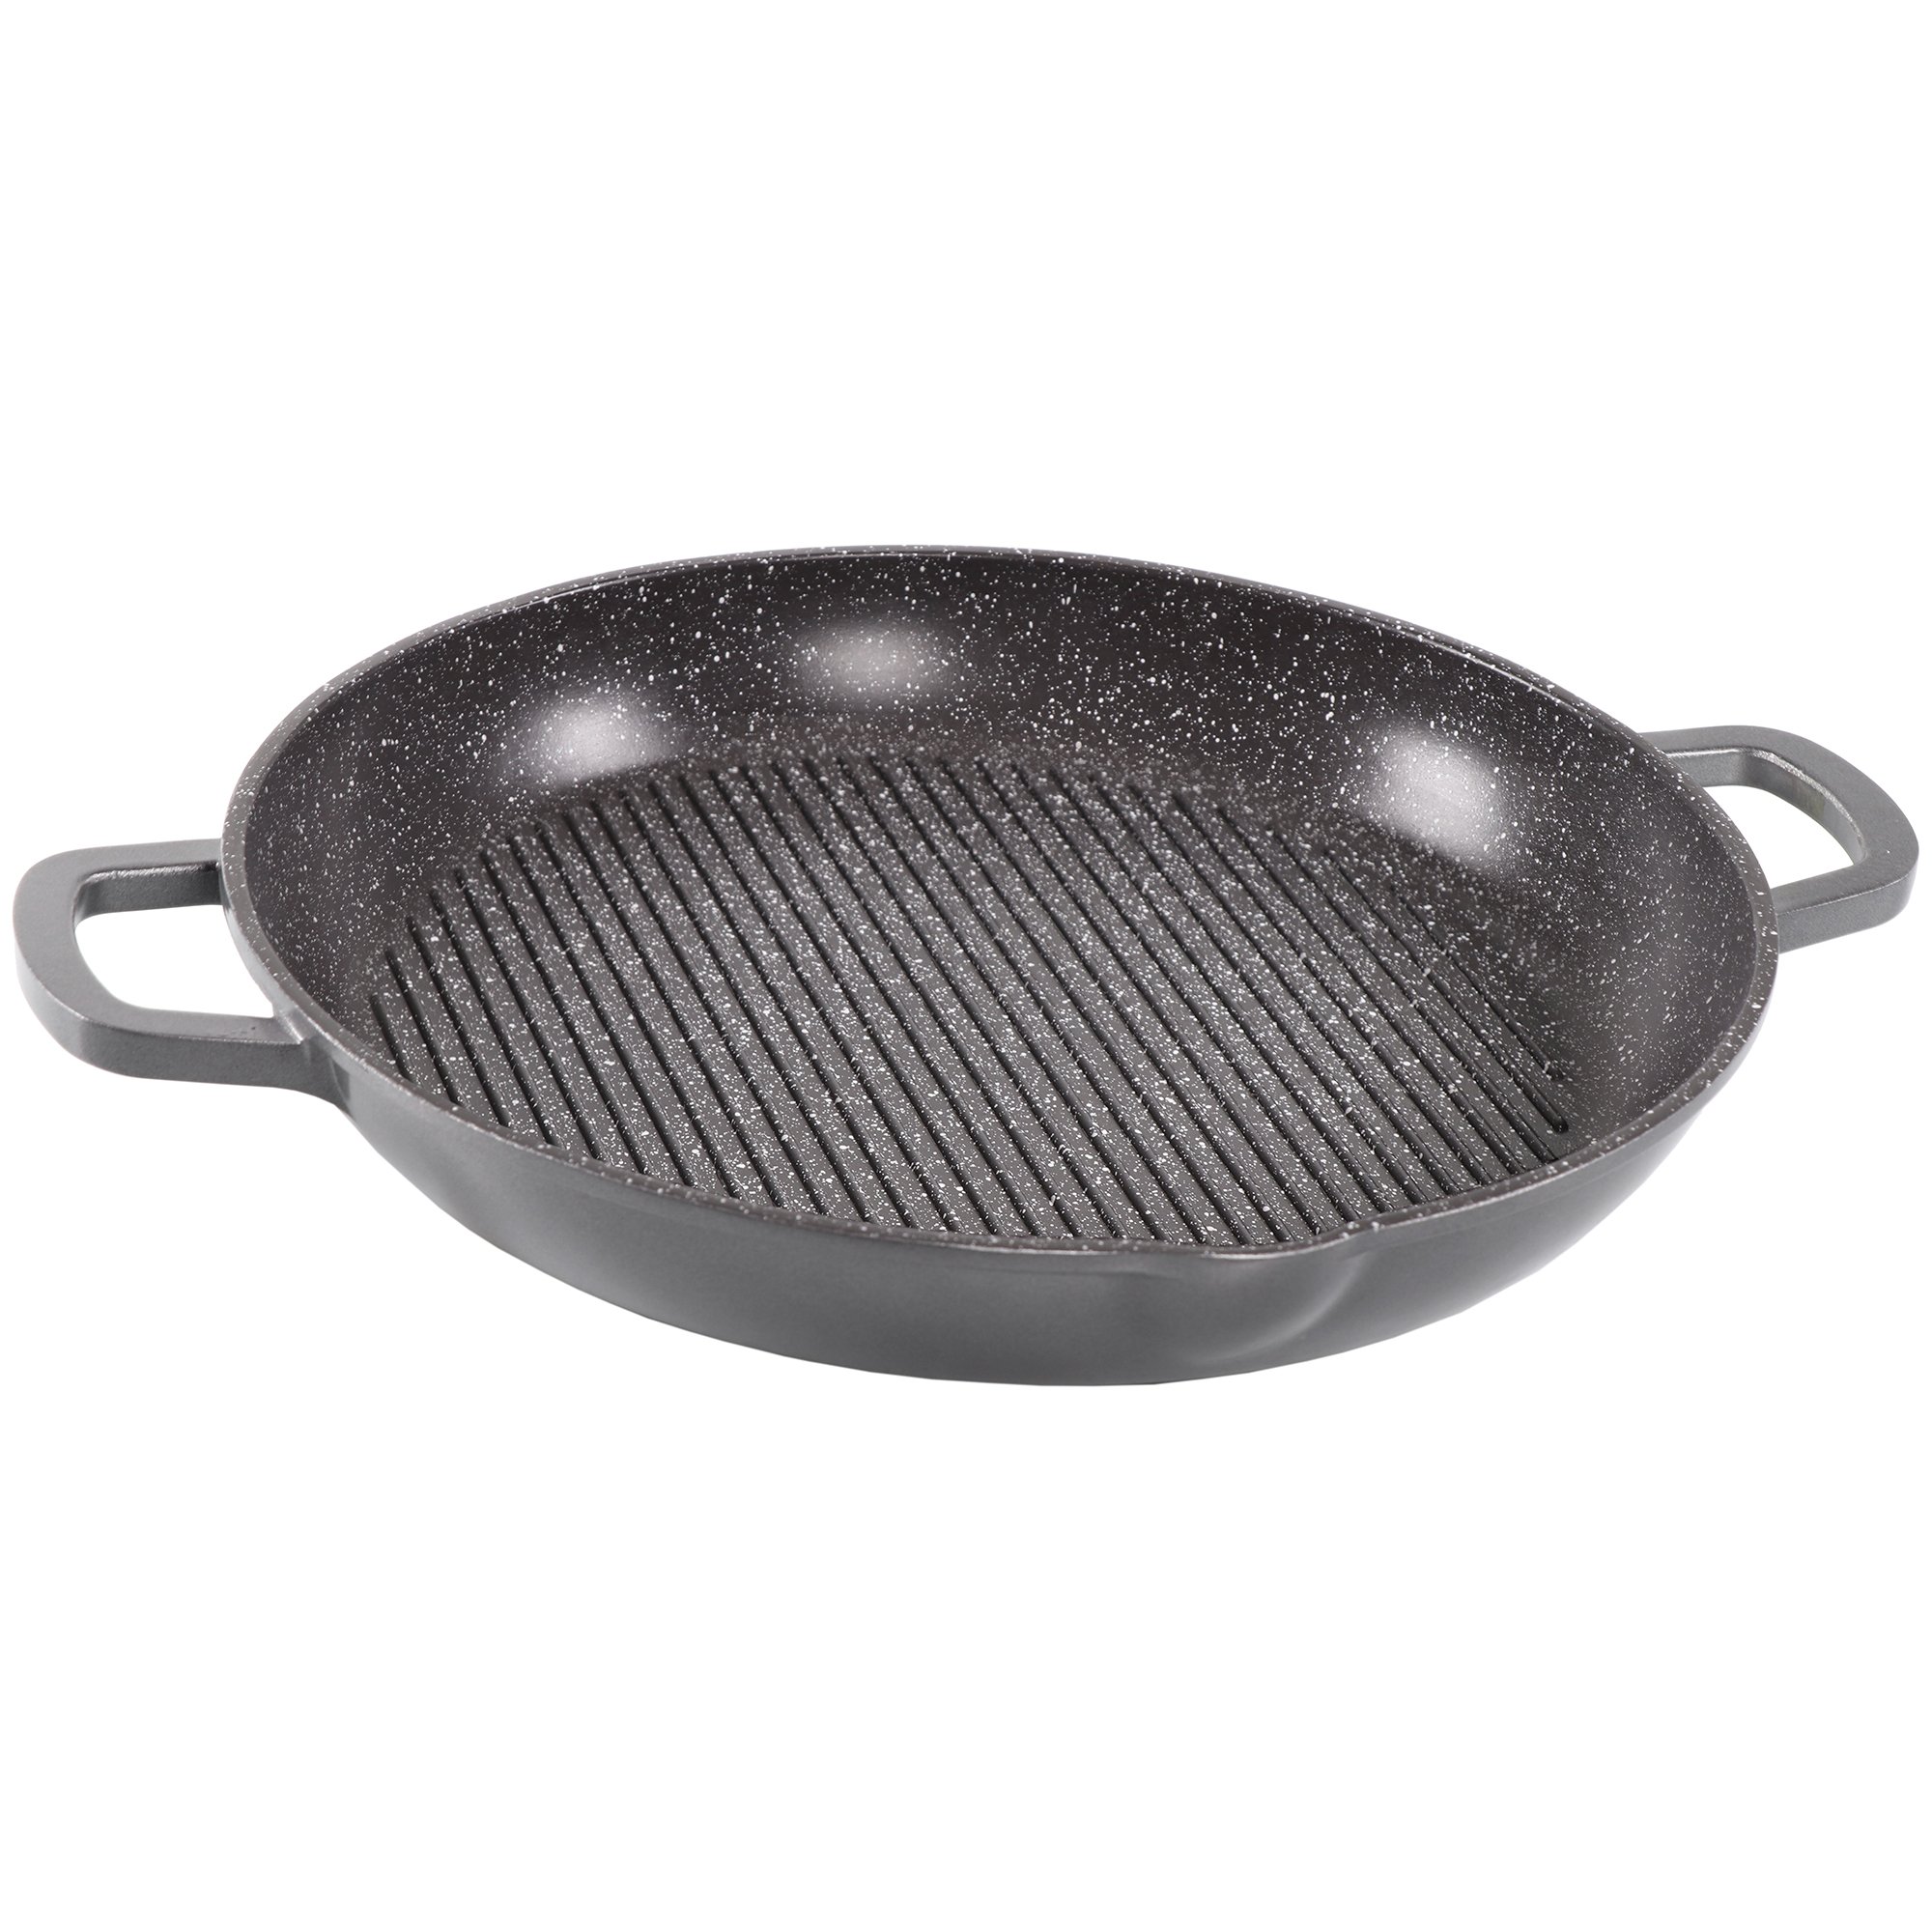 STONELINE® Grease-free griddle 28 cm, pan non-stick coated, induction and oven-safe